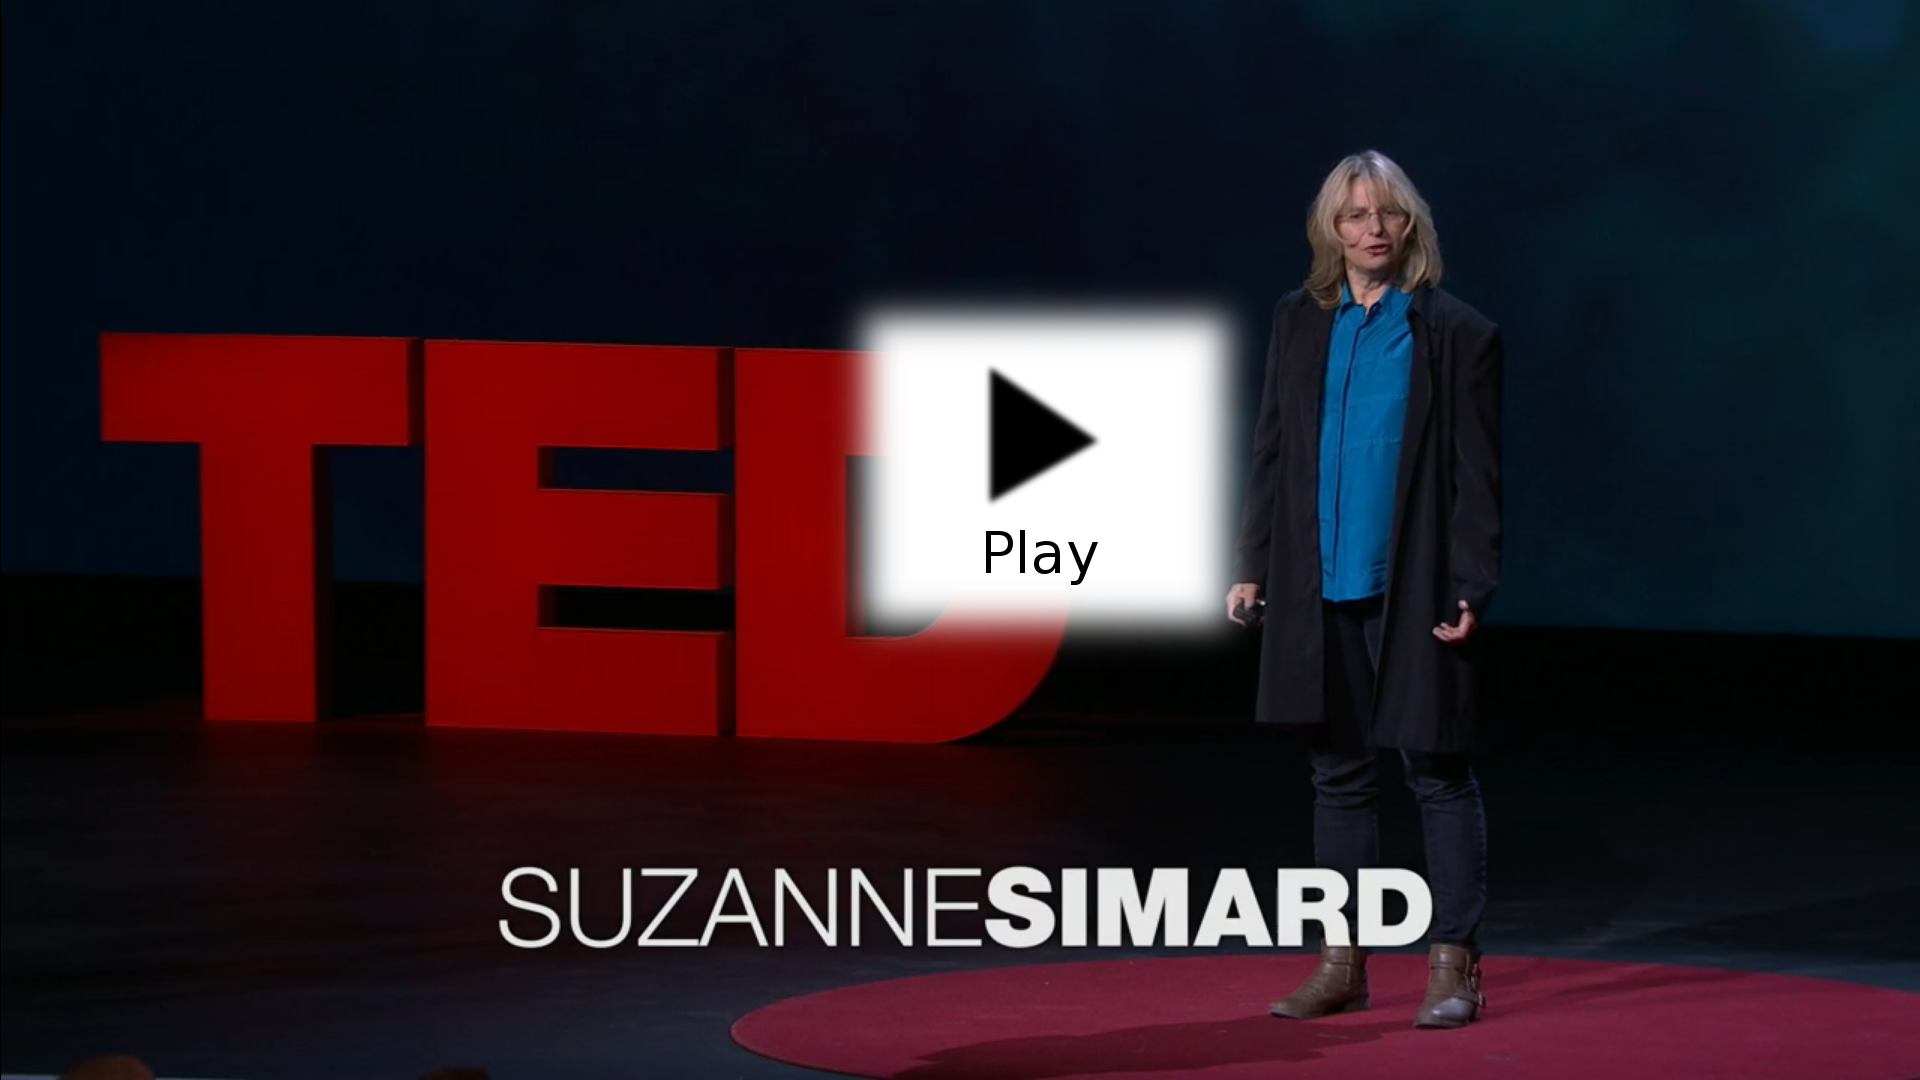 TED talk about the mycorrhizal networks which connect trees. <https://www.ted.com/talks/suzanne_simard_how_trees_talk_to_each_other (https://www.ted.com/talks/suzanne_simard_how_trees_talk_to_each_other)>